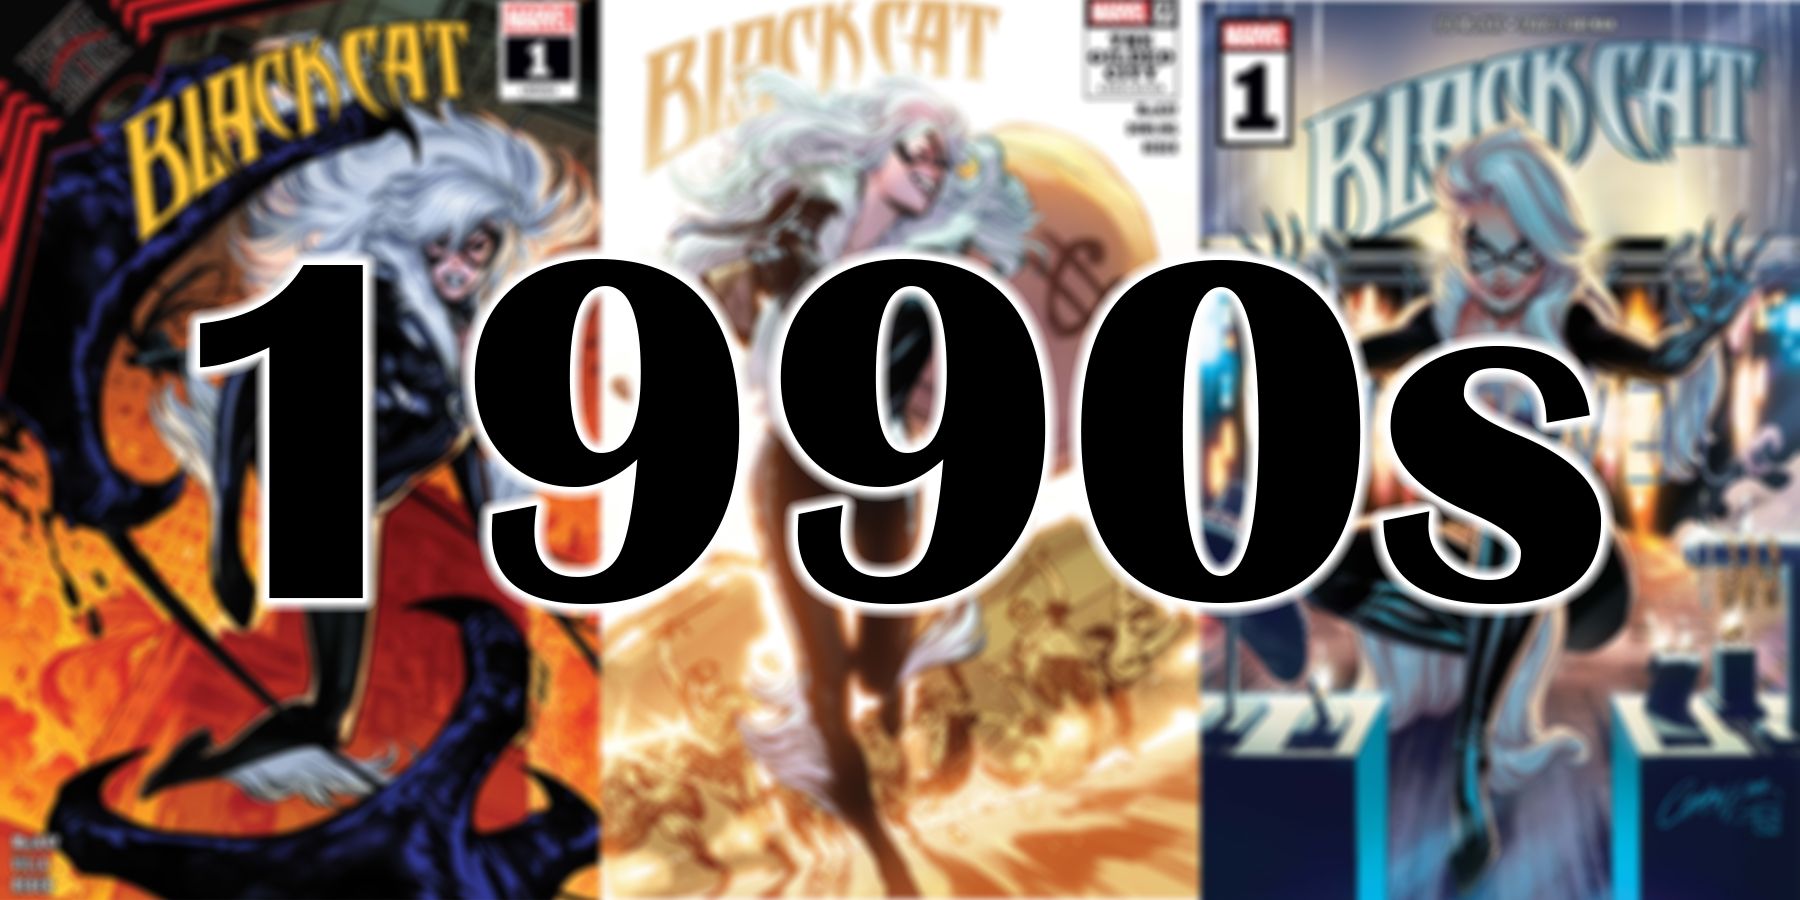 The 1990s year on top of a blurred background featuring 3 covers from Black Cat comic books by Marvel.